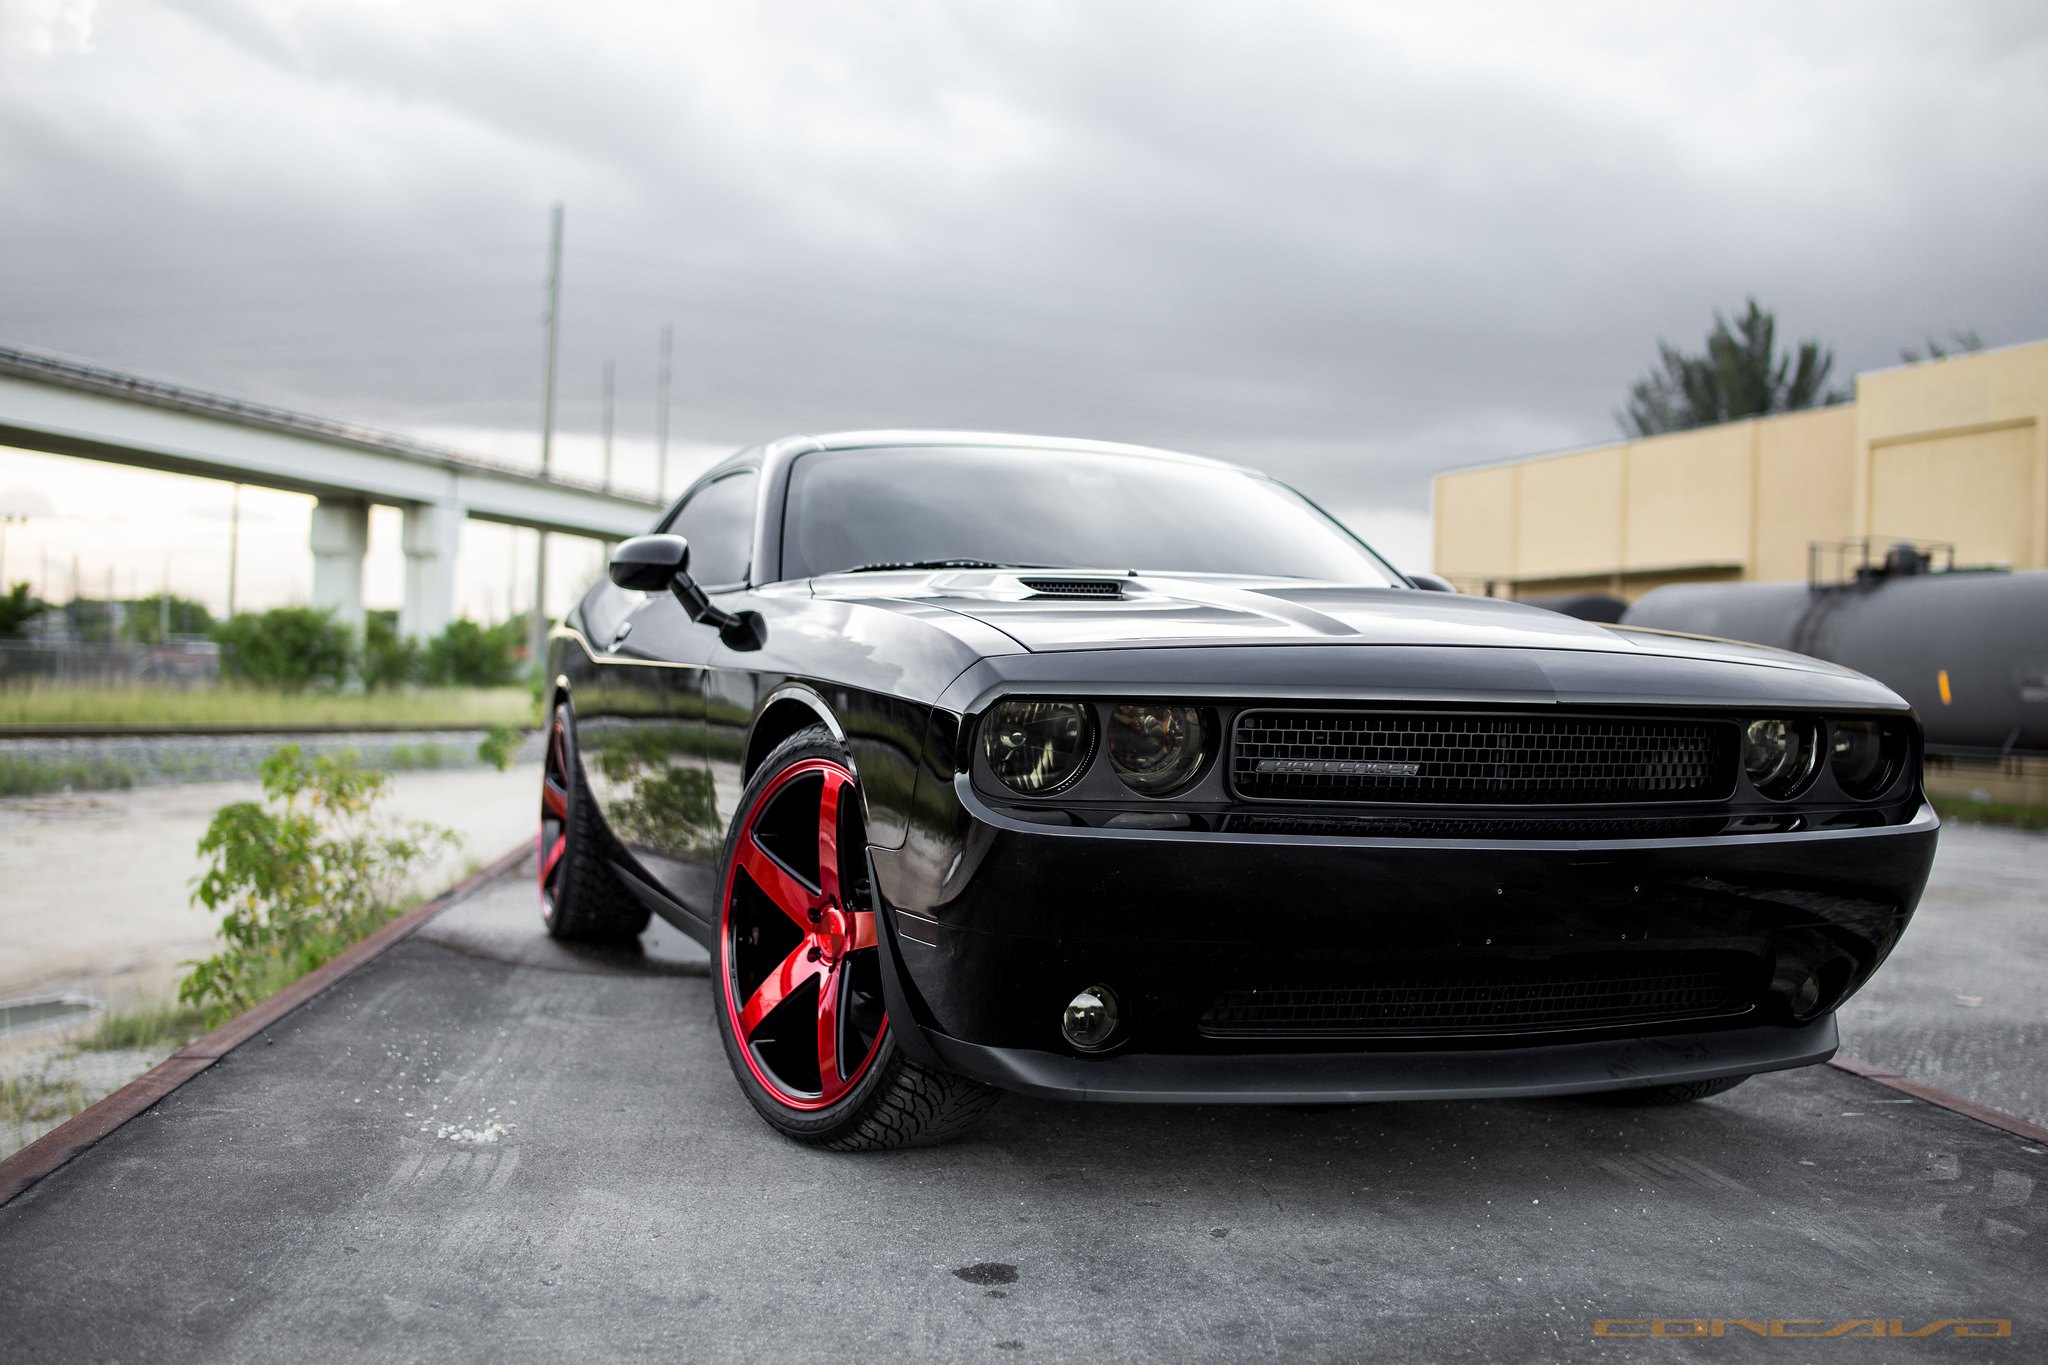 Red Concavo Custom Wheels On All-Black Dodge Challenger - Photo by Concav